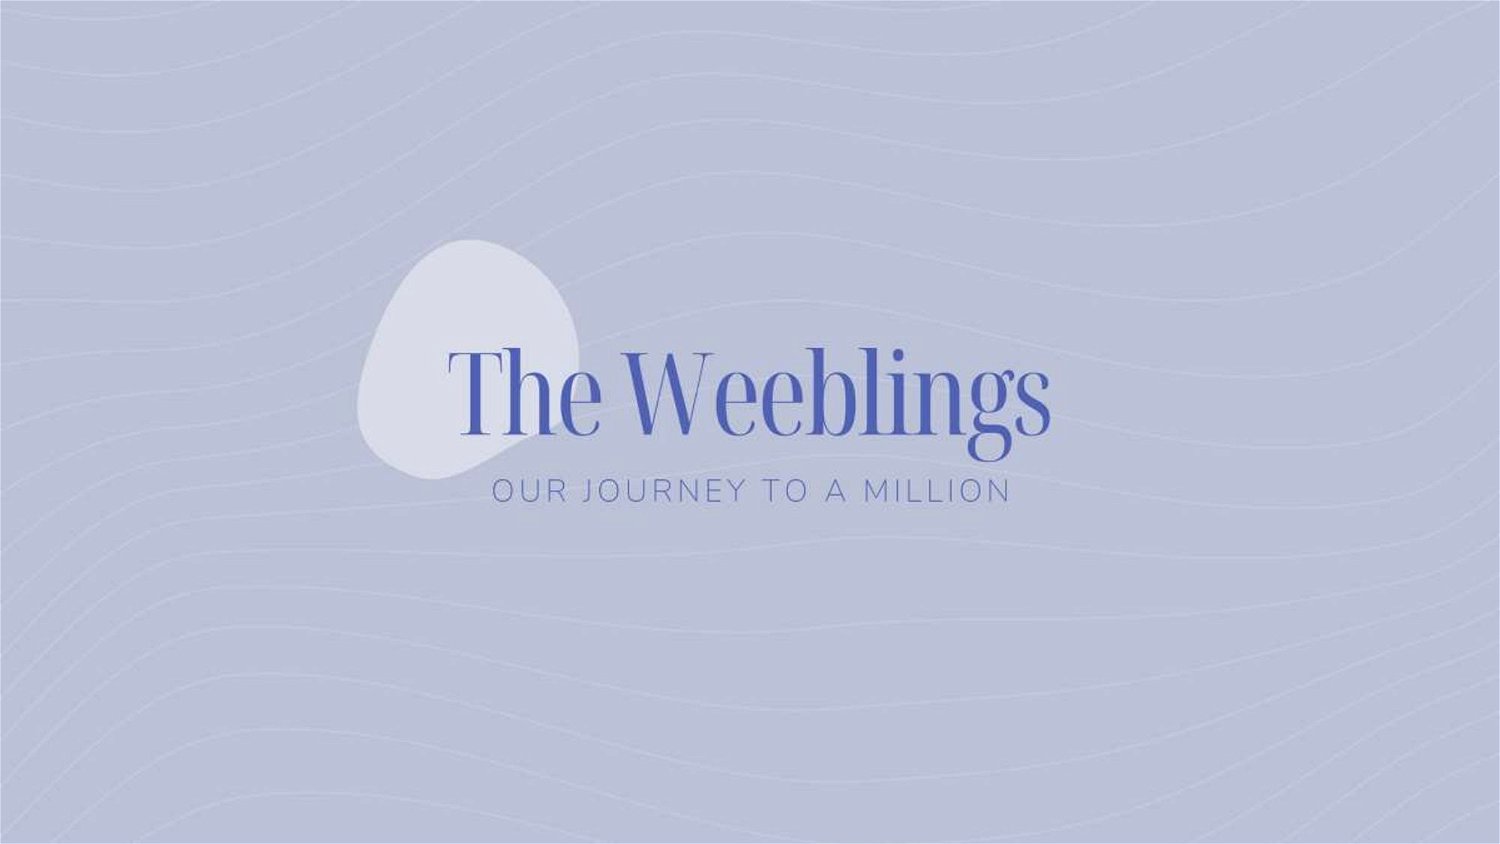 The Weeblings is creating educational and entertainment content